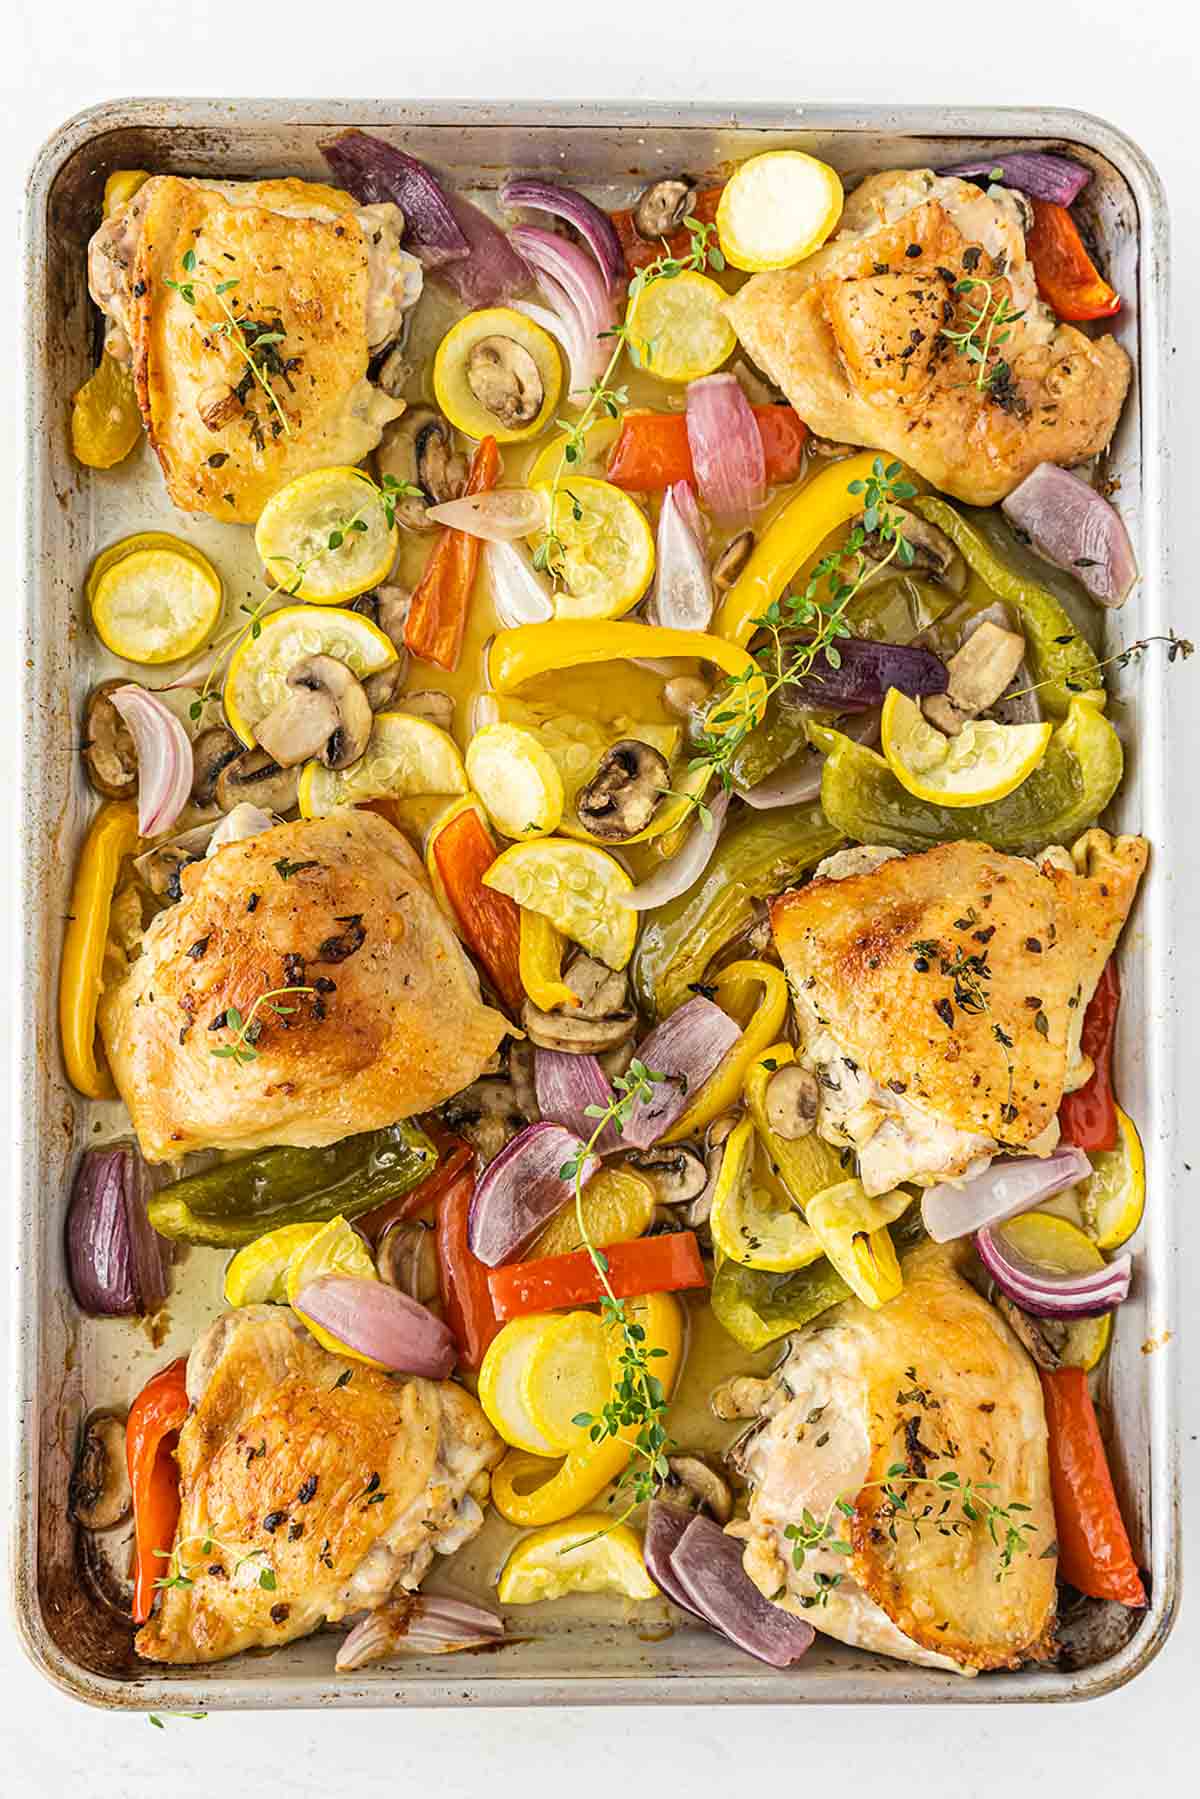 sheet pan full of oven baked chicken thighs and cooked red onion, red bell peppers, yellow squash and mushrooms.